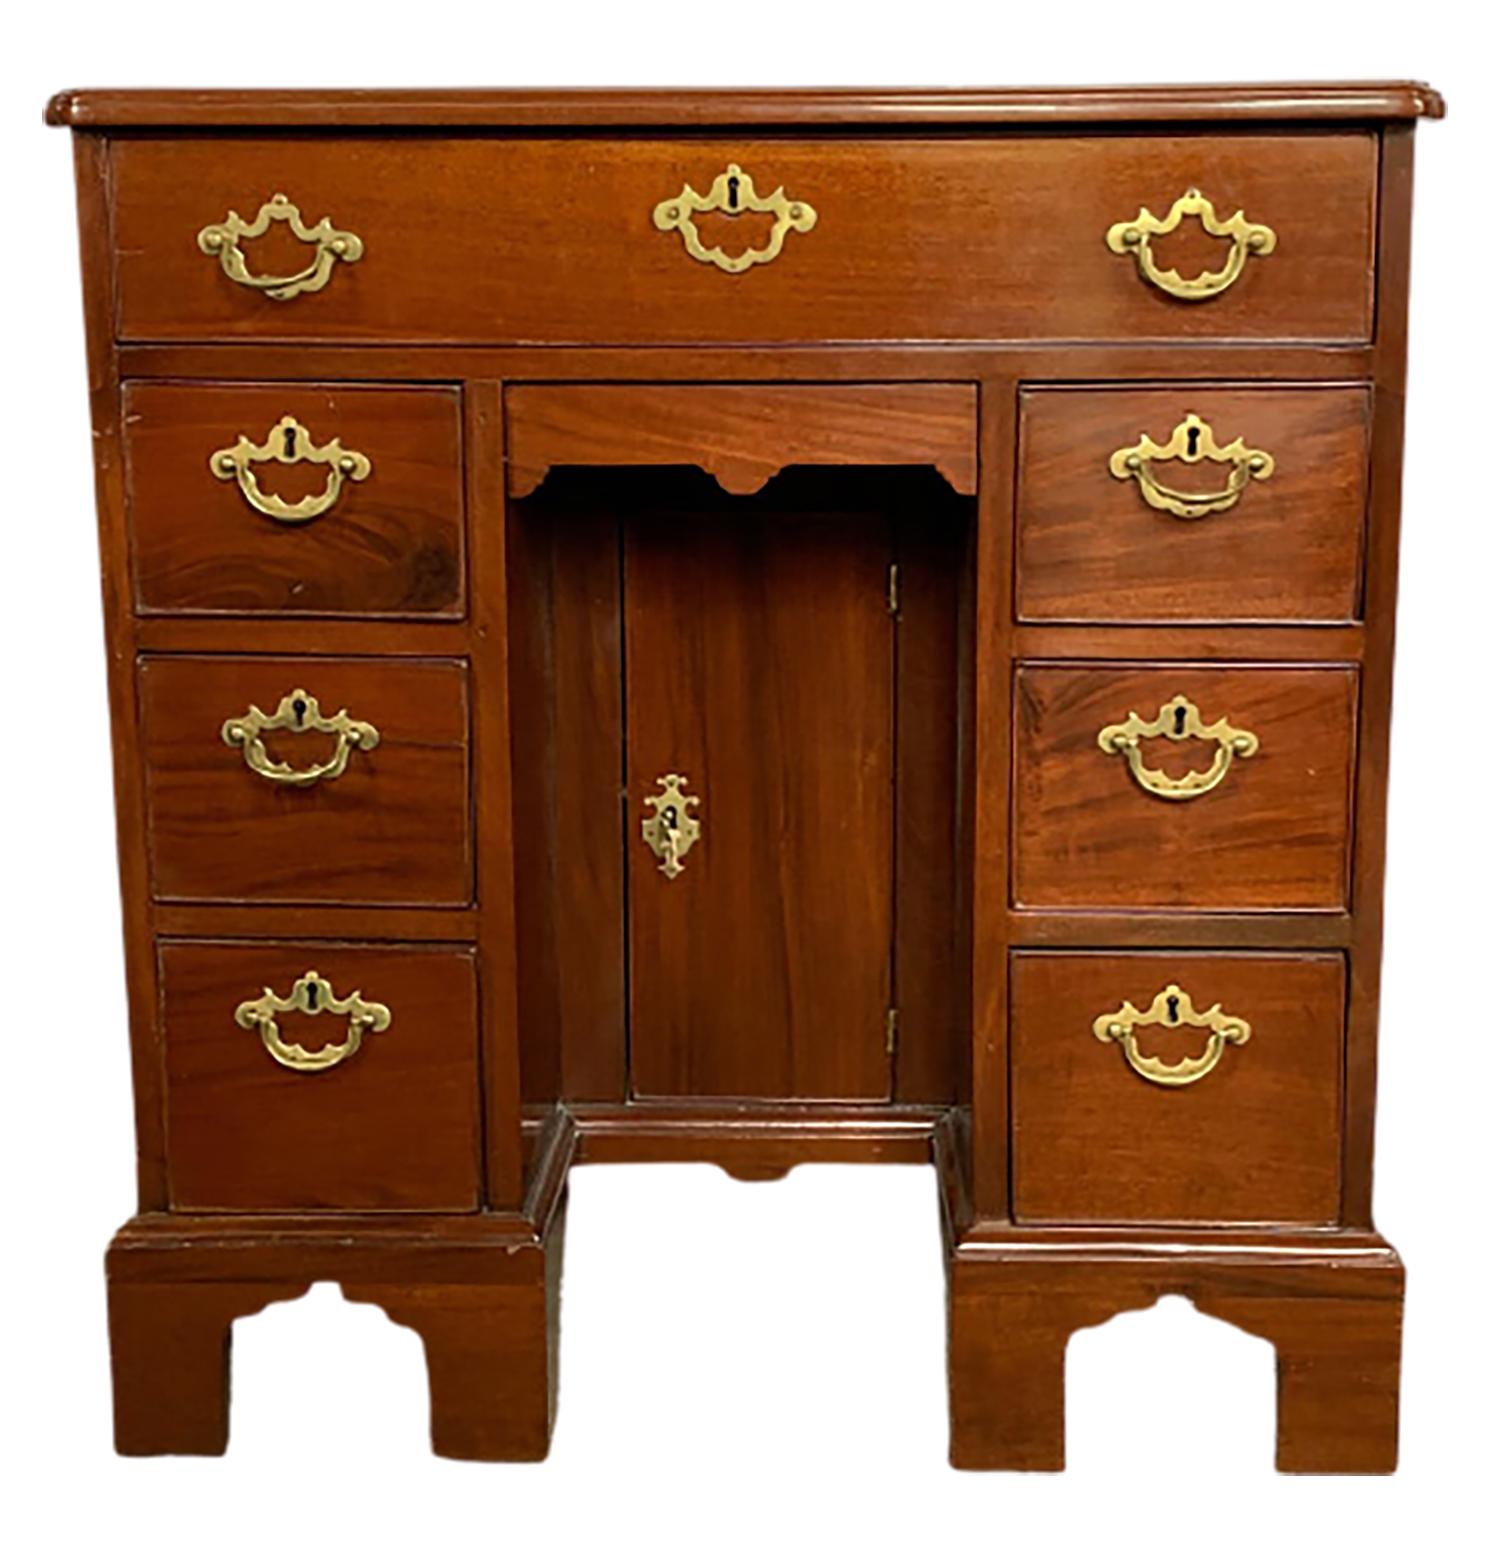 Mid-19th century Georgian style mahogany knee hole desk in very nice original condition. The case having a single top drawer with a knee hole center flanked by three by three drawers and a center hidden door in the knee hole area. The whole on